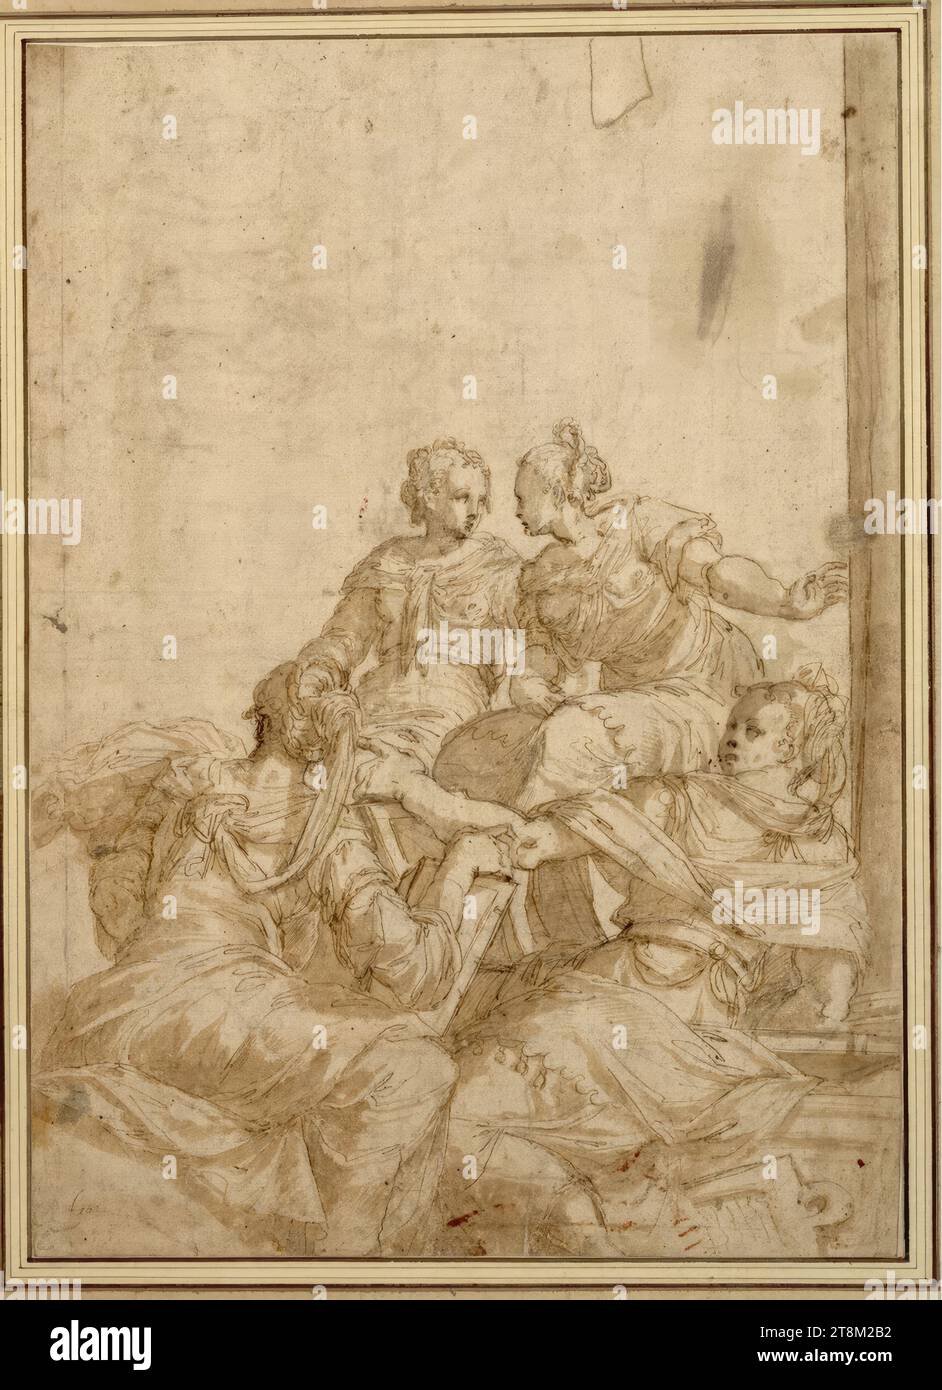 Four Sibyls, Giambattista Zelotti (Venice 1526 - Mantua 1578), drawing, traces of chalk; Feather; washed; a piece inserted at the top, 38.7 x 27.4 cm, l.l. Duke Albert of Saxe-Teschen, lower left 'Fatt' in an old hand Stock Photo